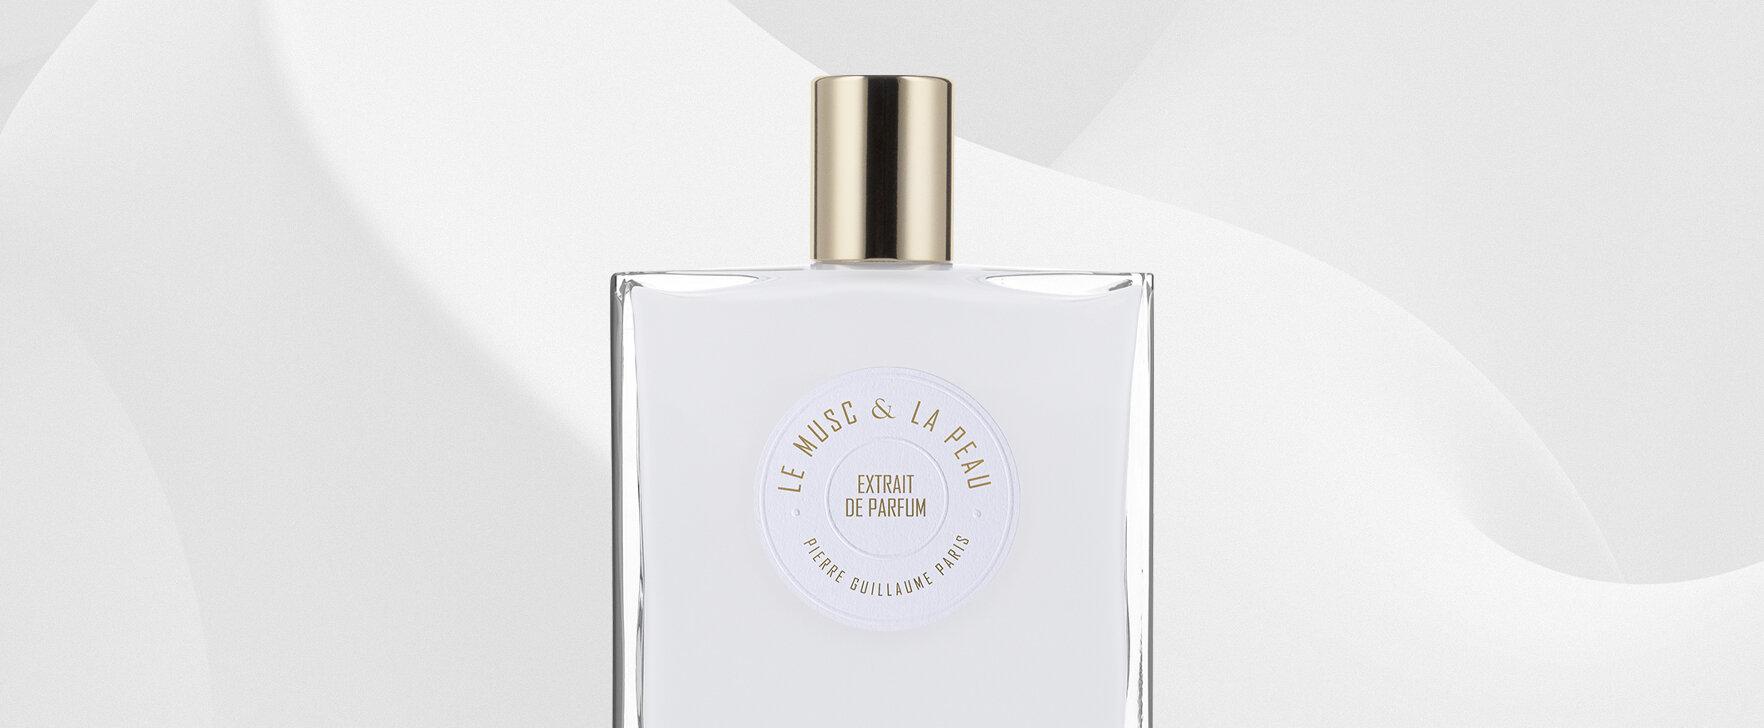 An Ode to the Sensuality of the Skin: the New Extrait de Parfum Le Musc & la Peau by Pierre Guillaume